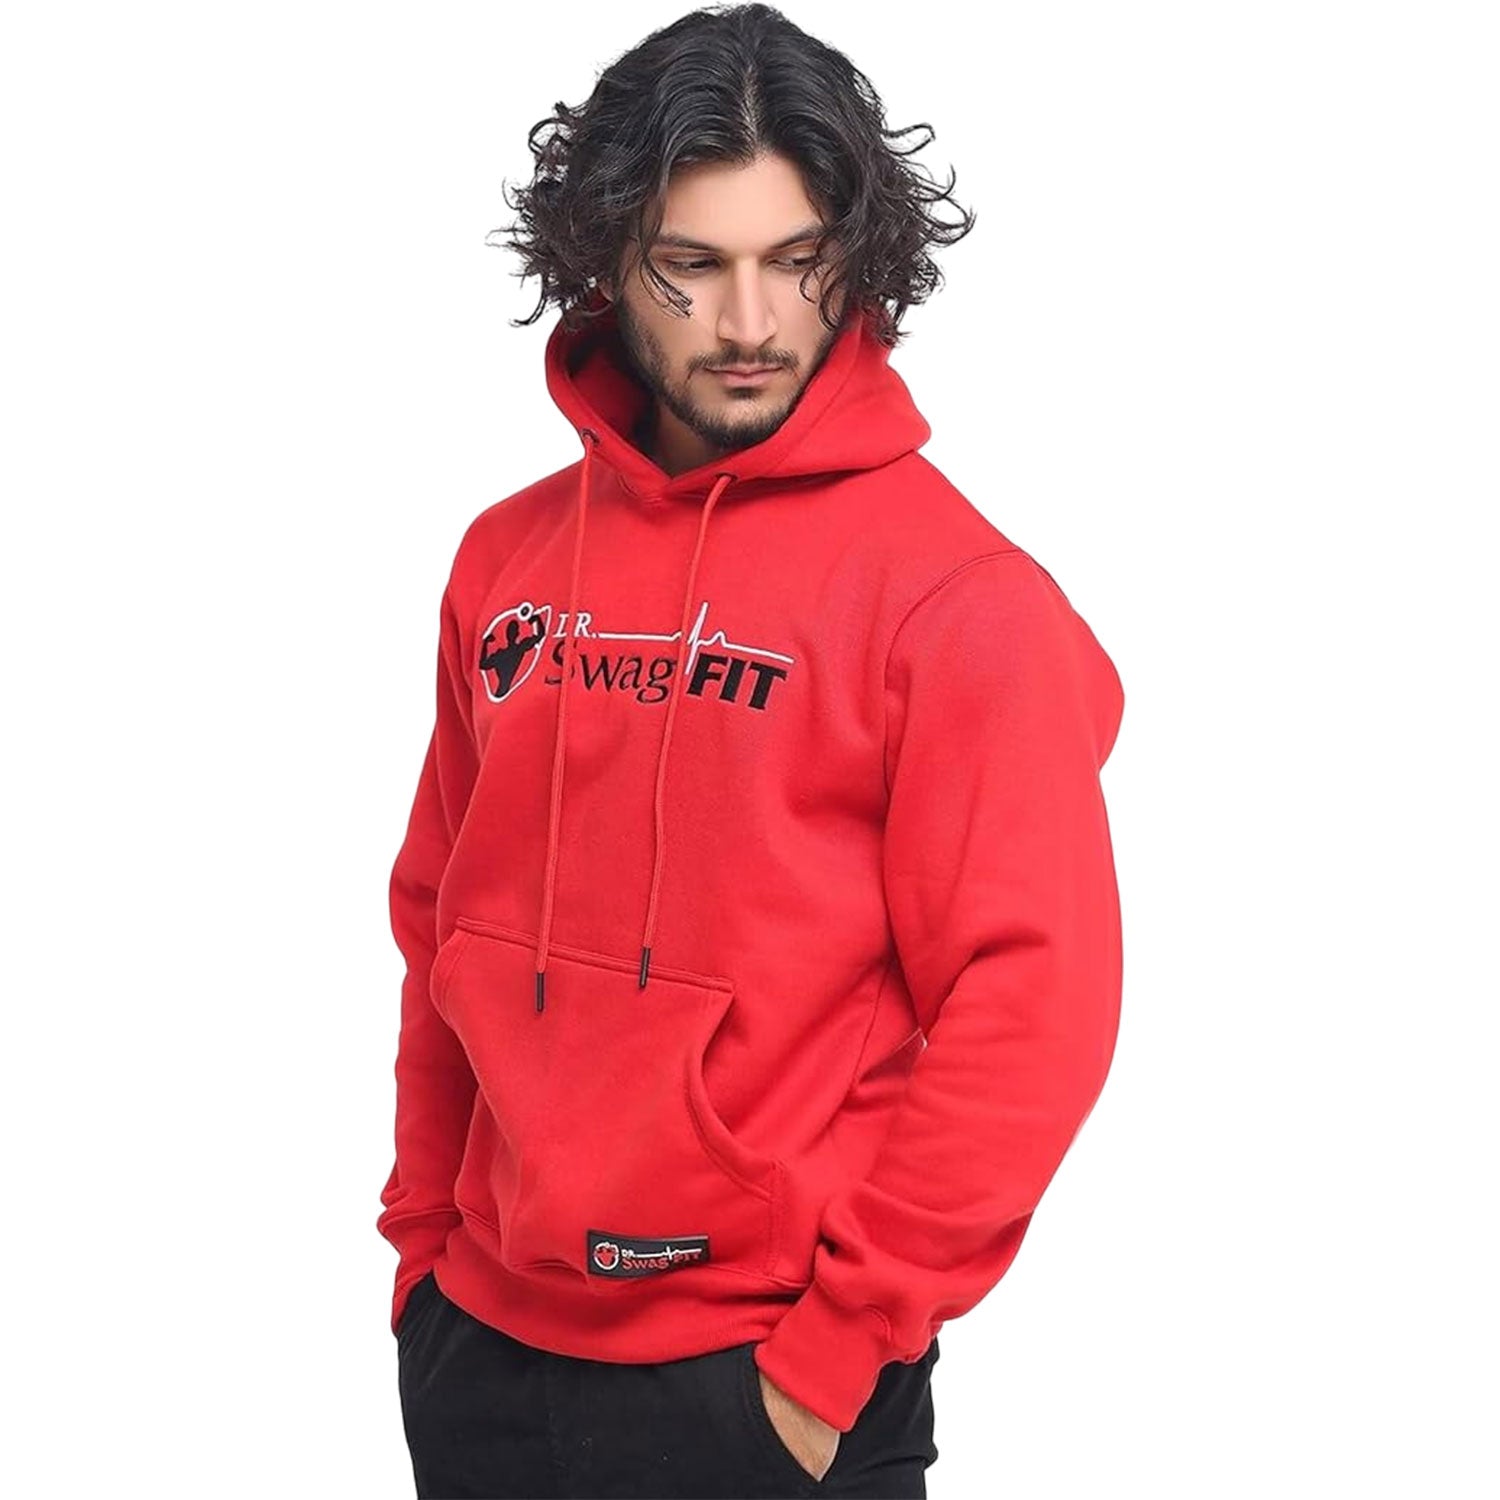 Dr. SwagFit Unisex Adult Classic Red Hoodie